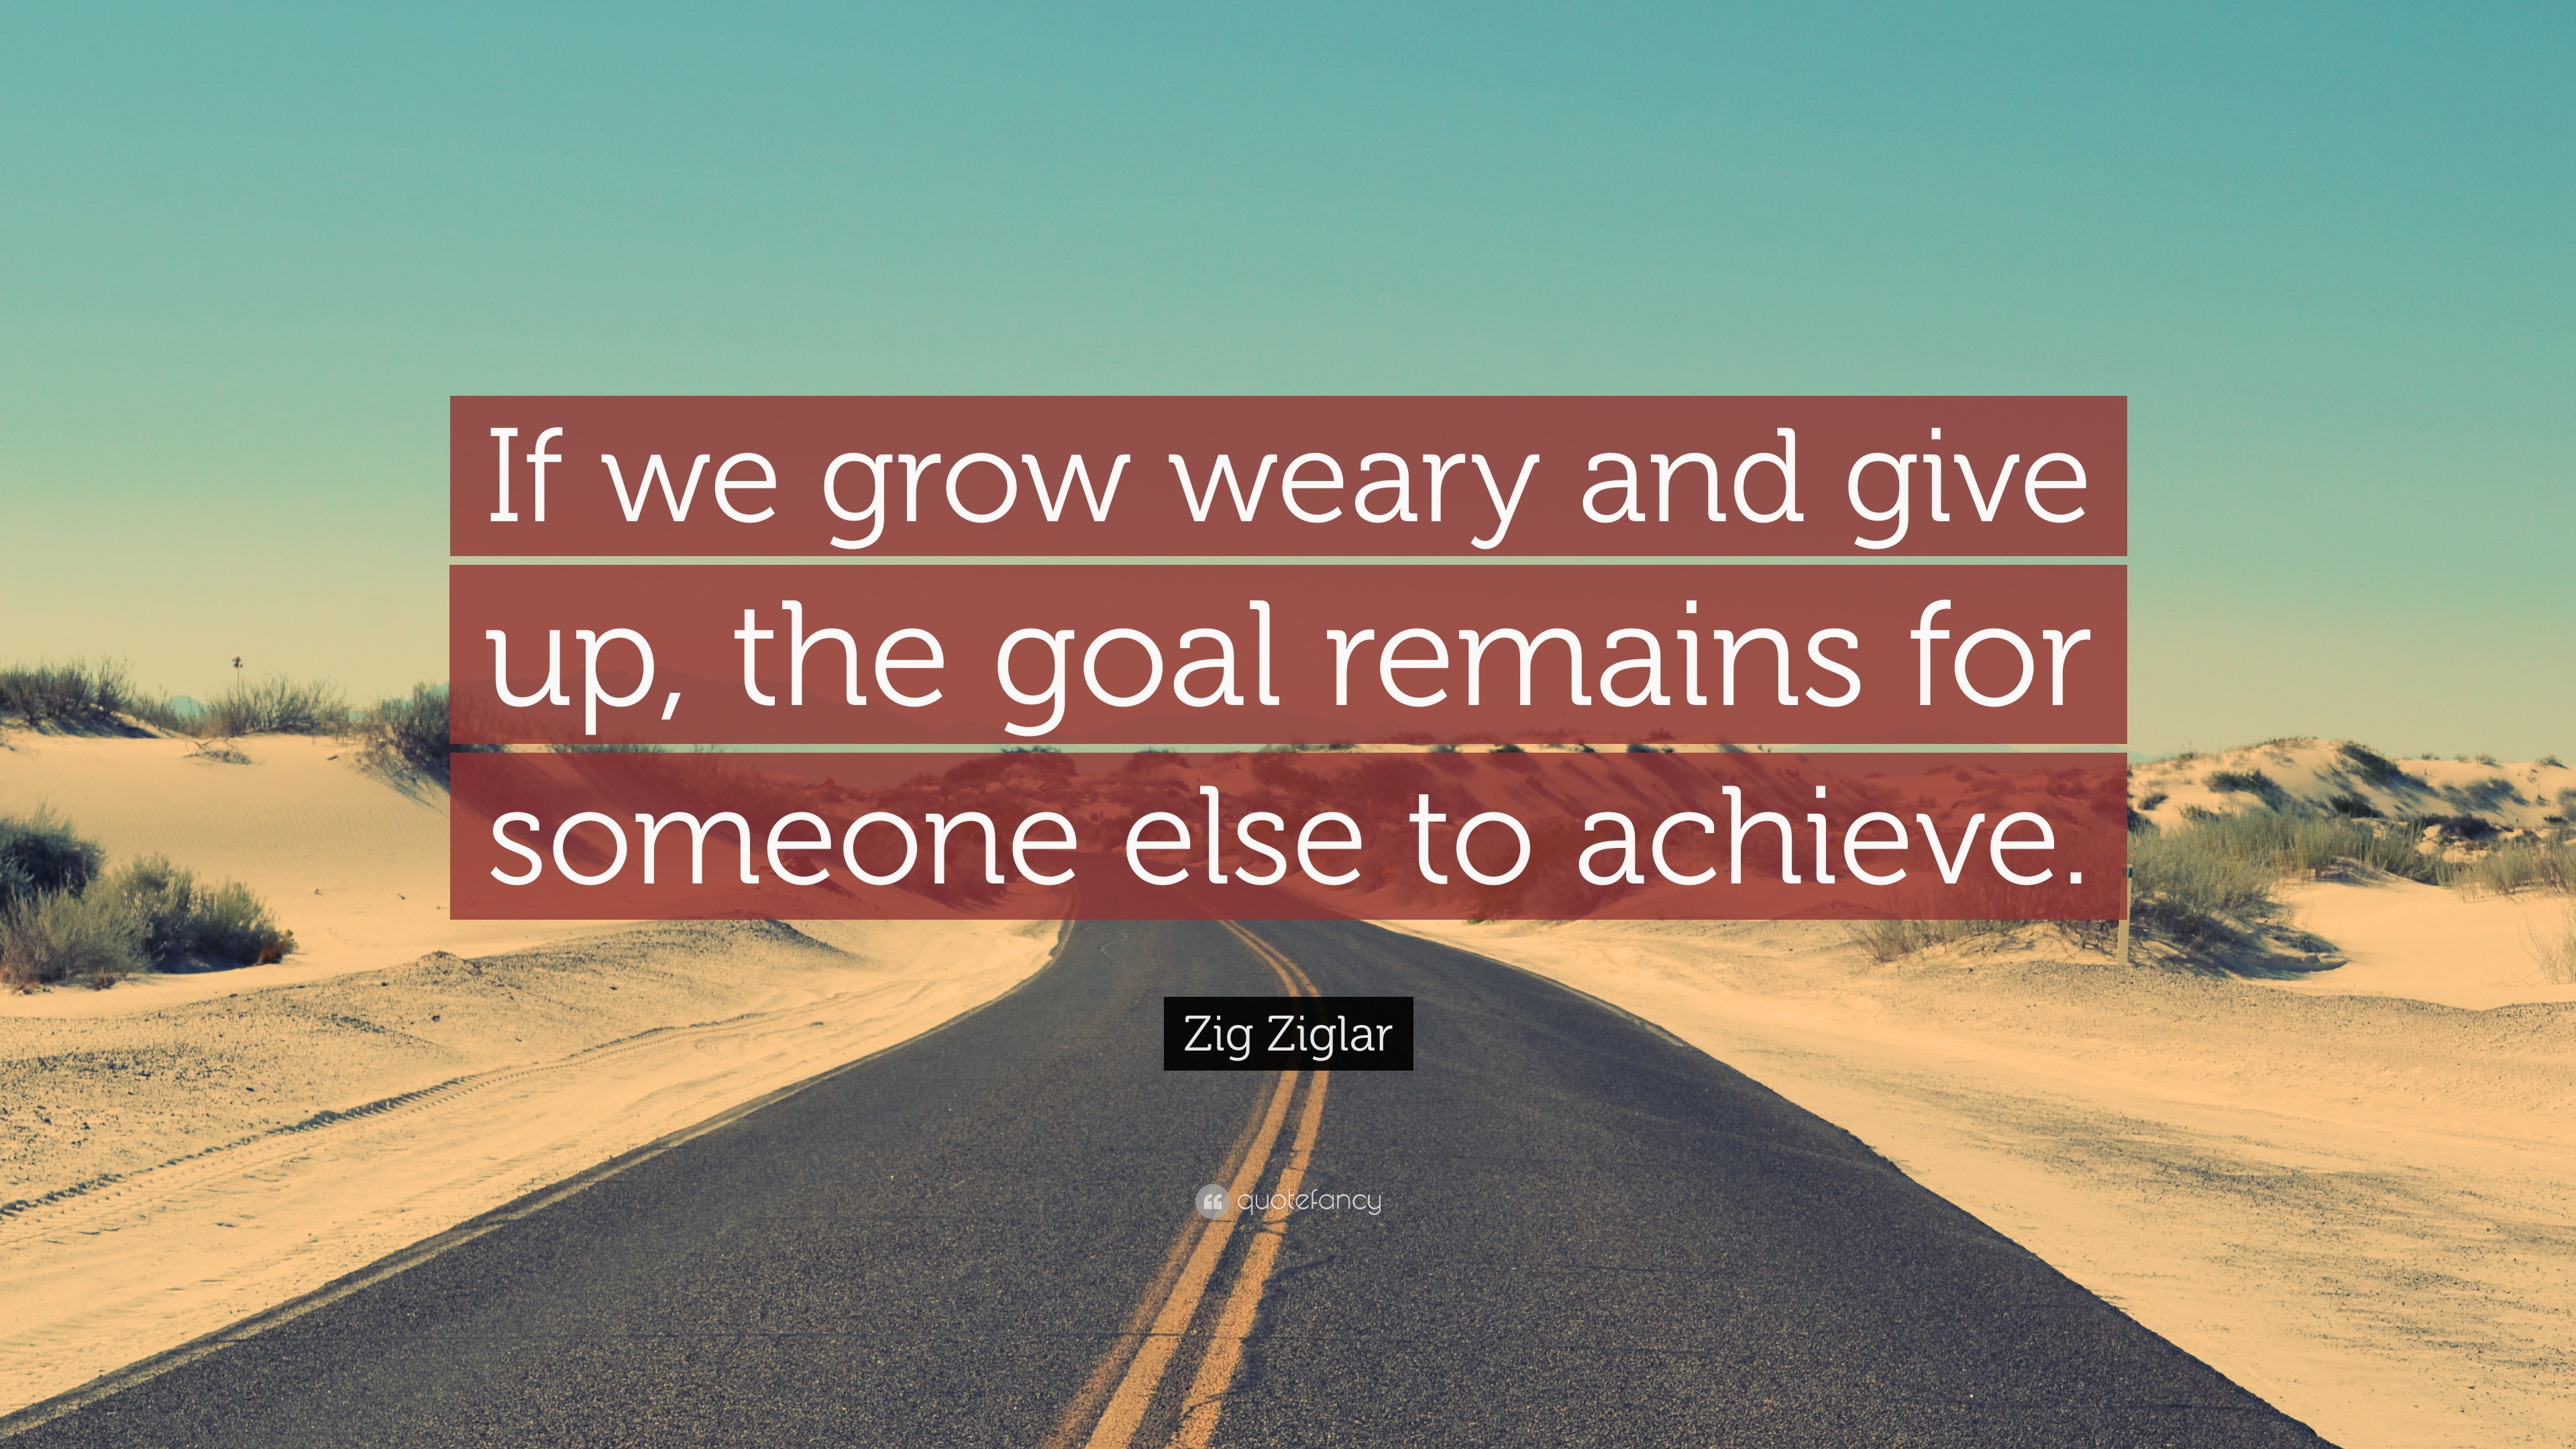 Zig Ziglar Quote: “If we grow weary and give up, the goal remains for ...